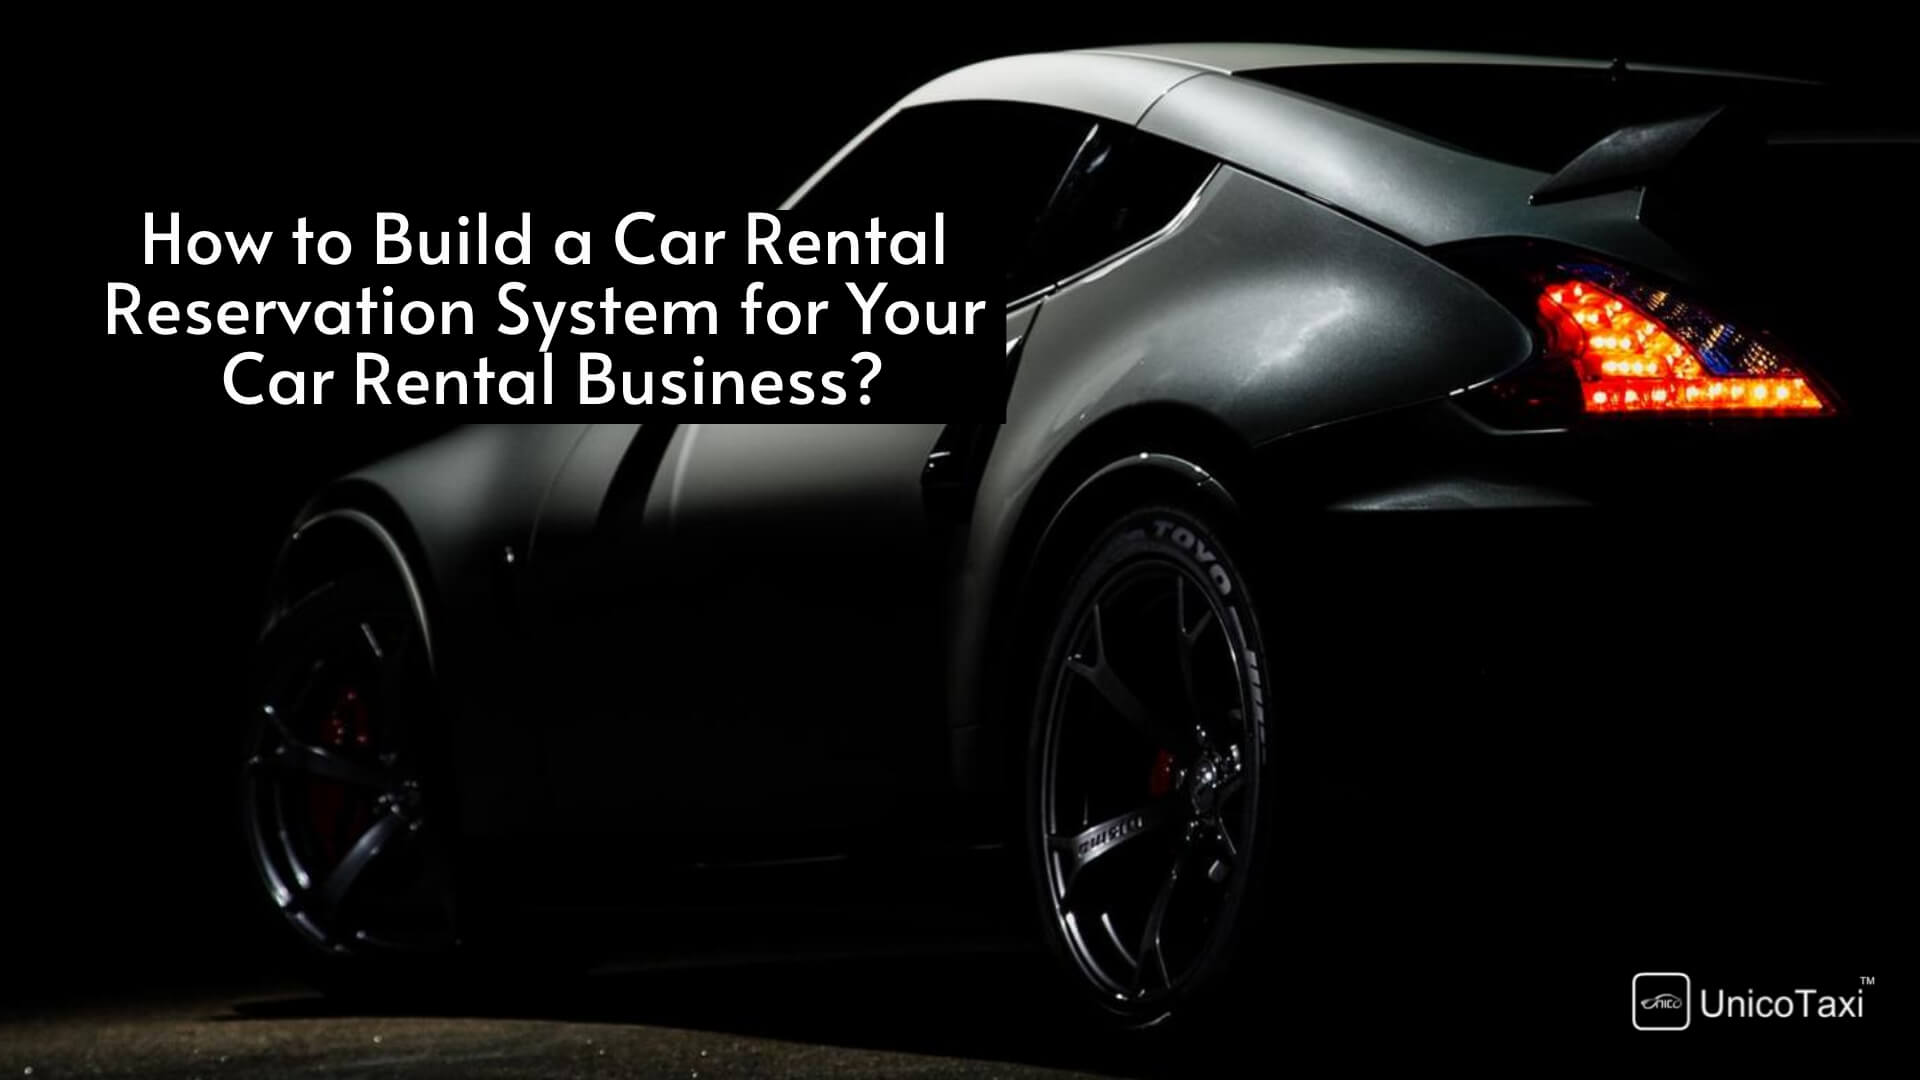 How to Build a Car Rental Reservation System for Your Car Rental Business?